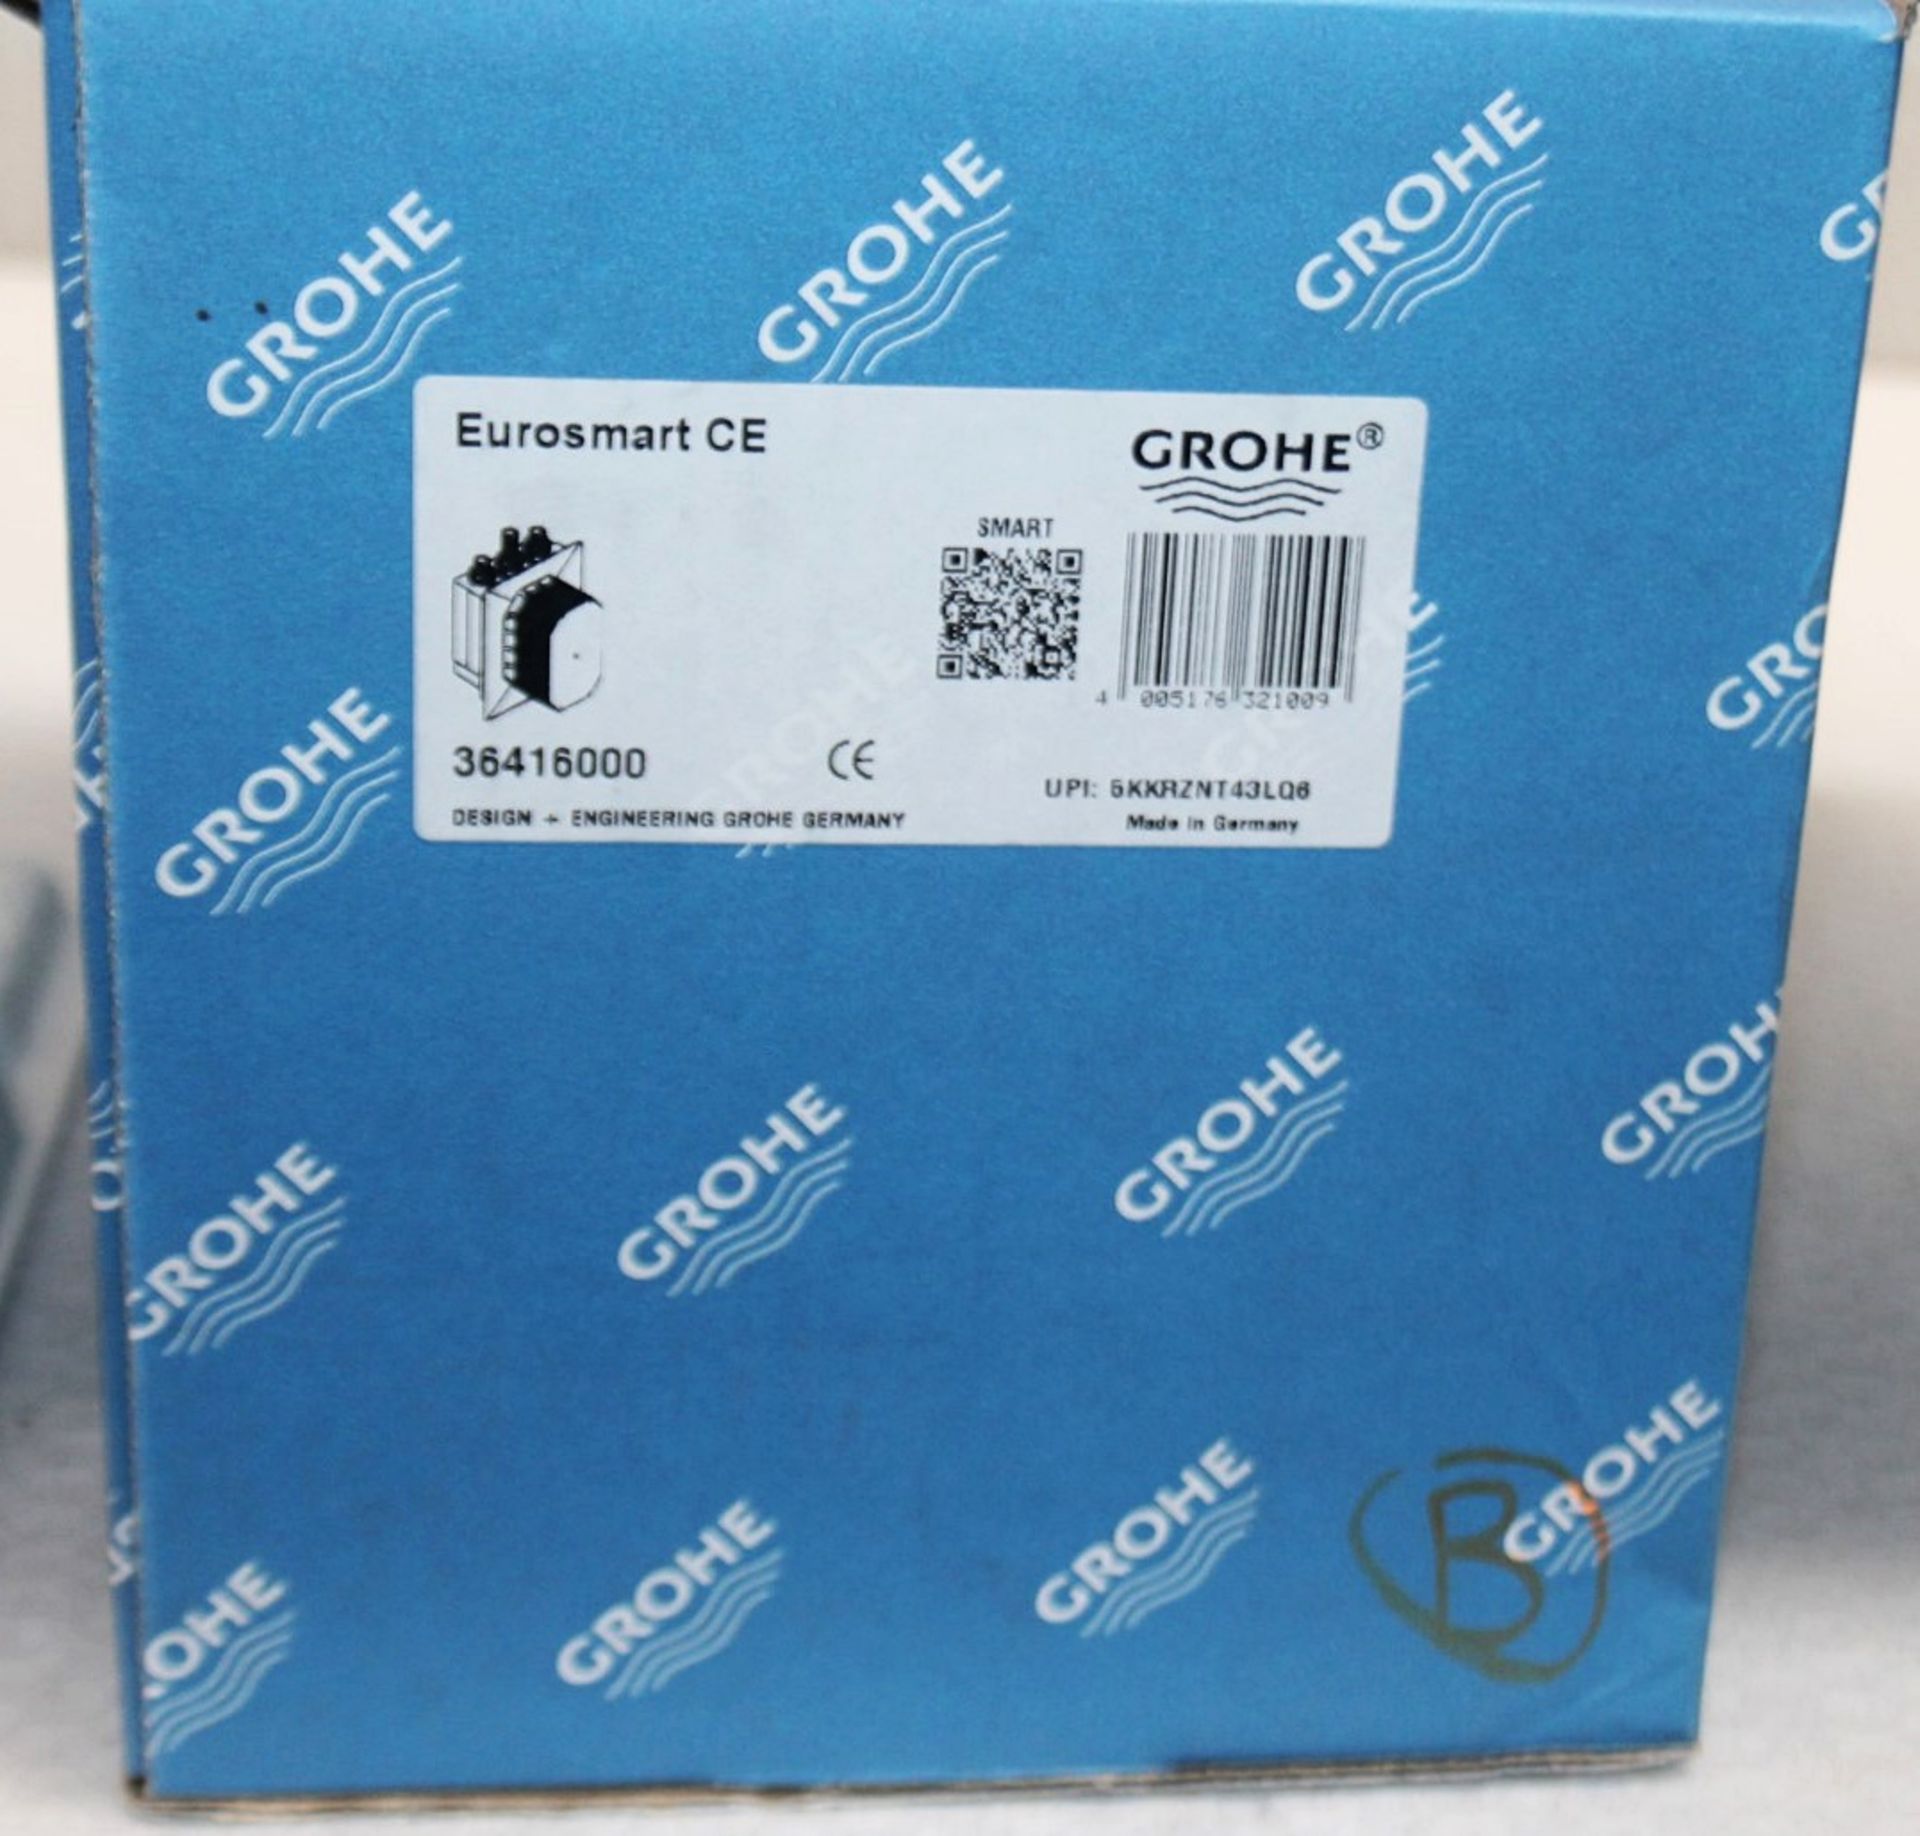 1 x GROHE Eurosmart Cosmopolitan E Concealed Control Unit - Ref: 36416000 (B) - New & Boxed - Image 4 of 11